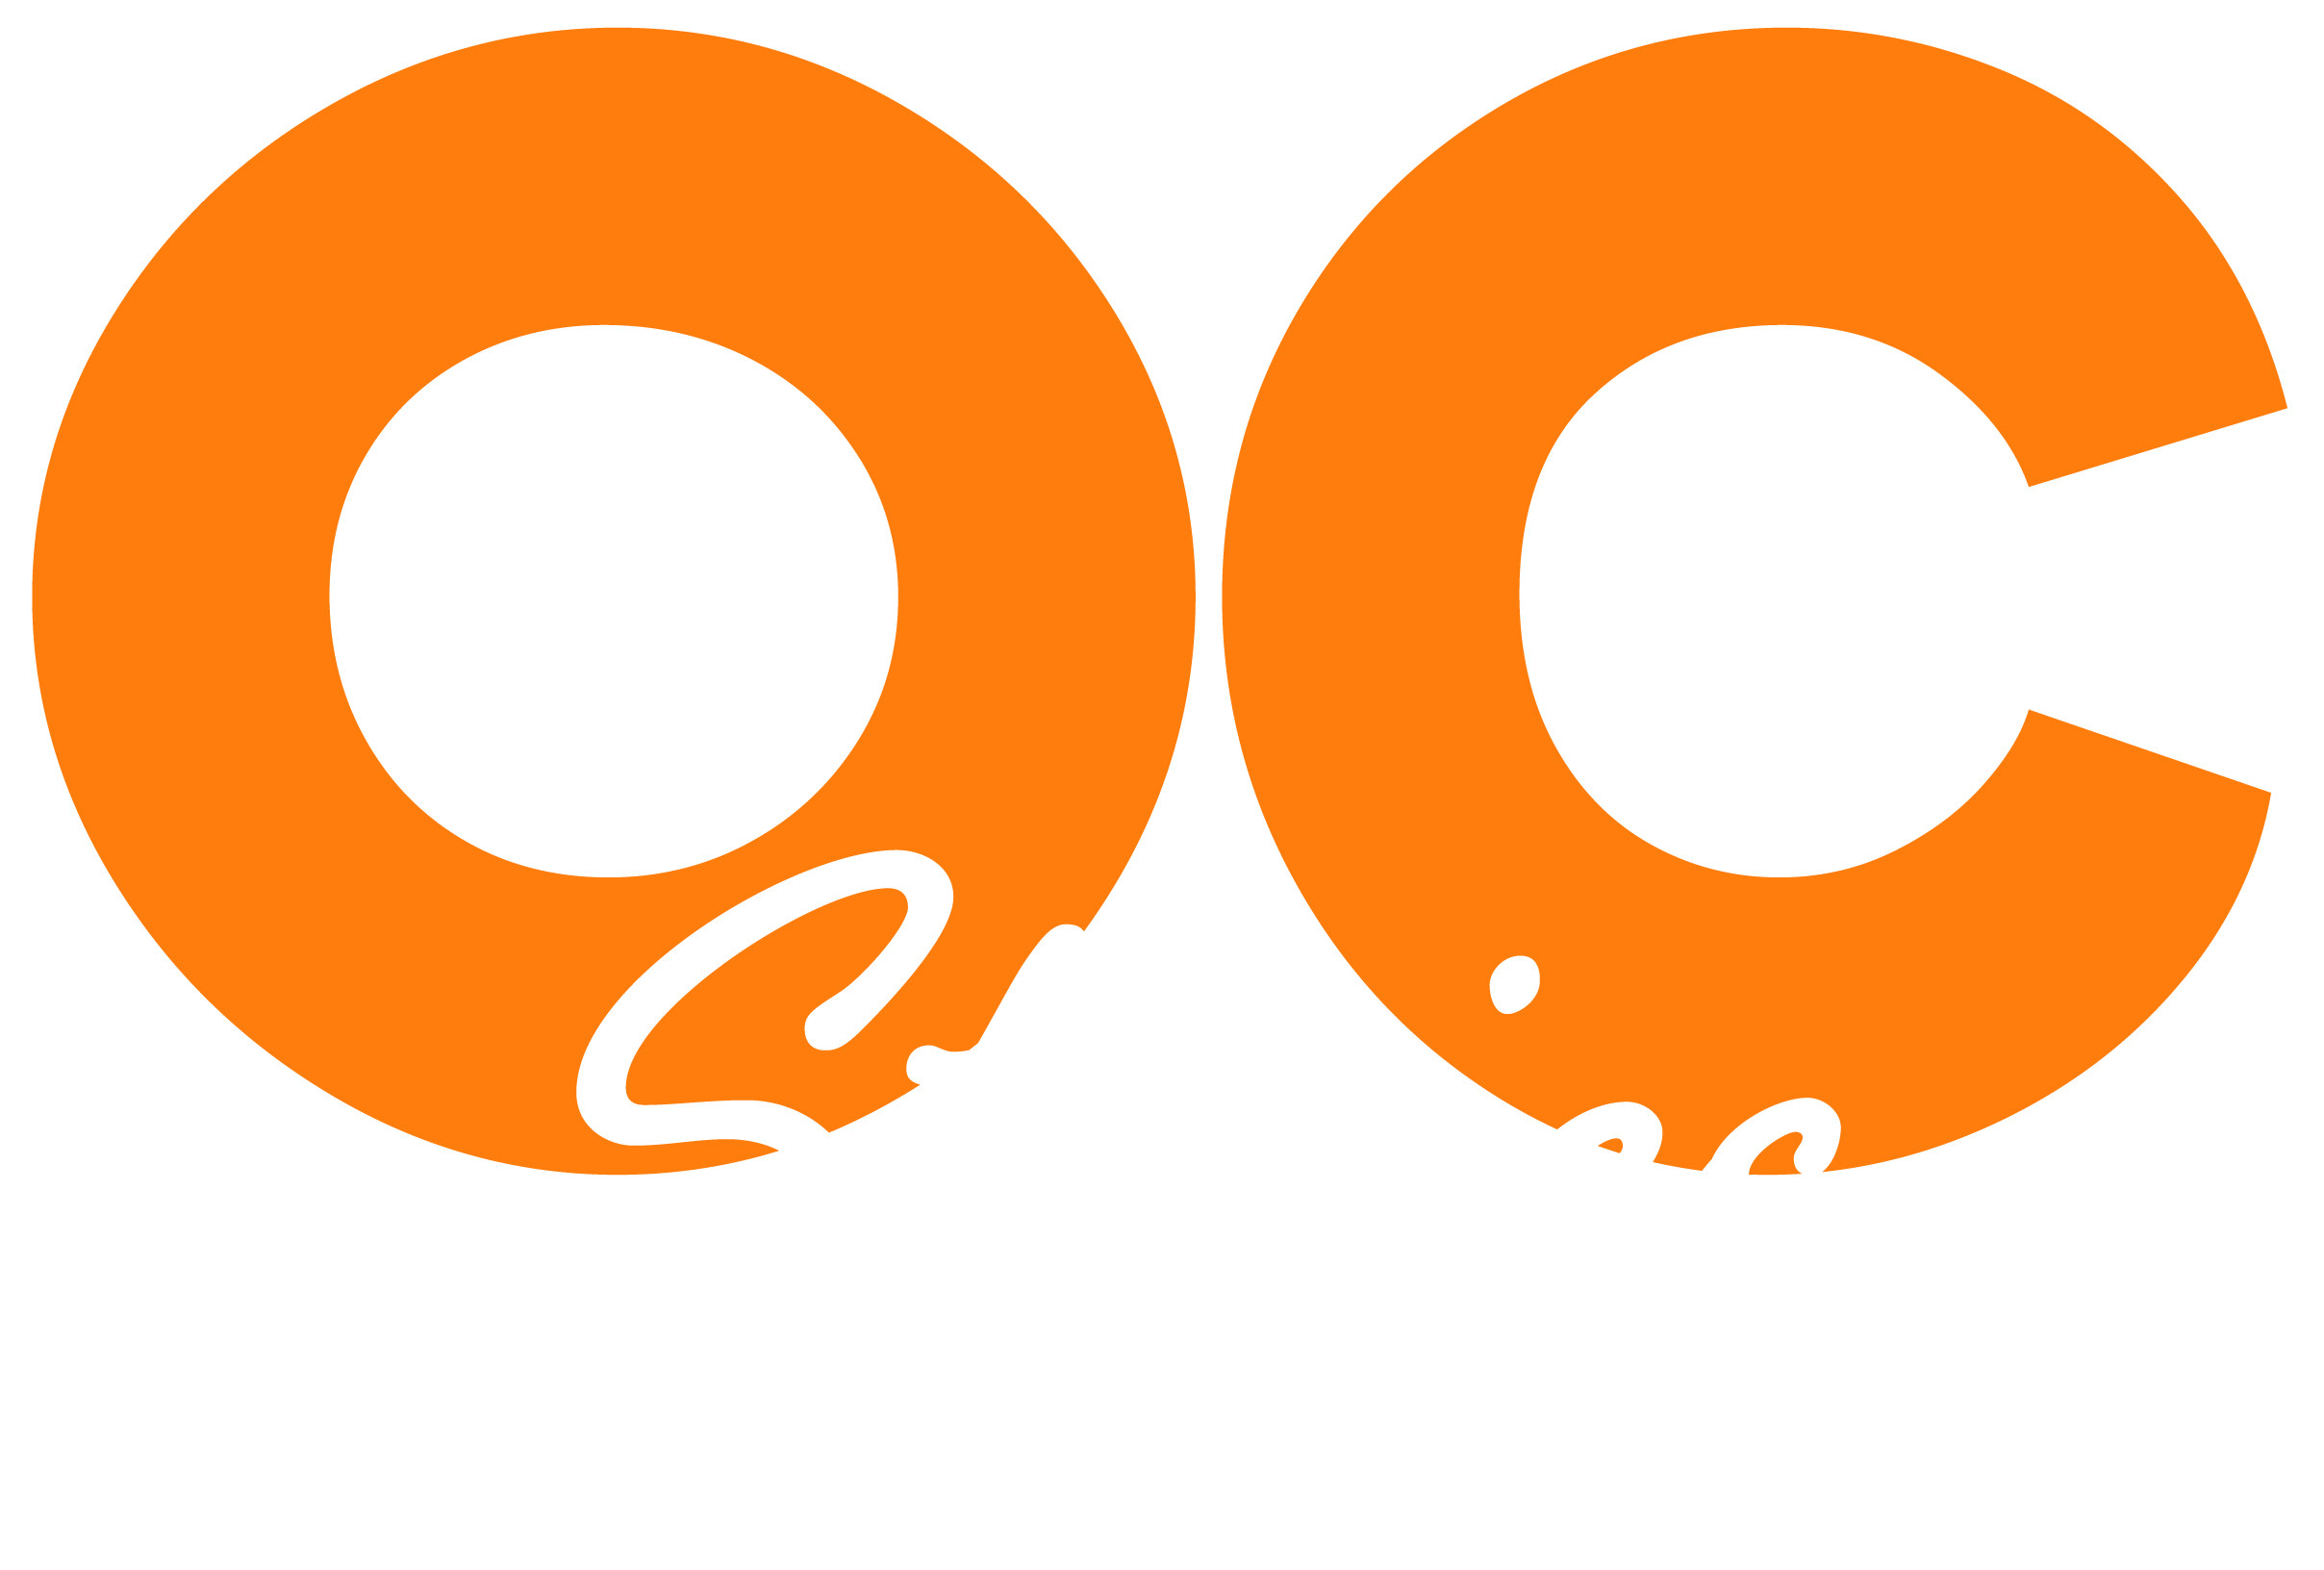 OC Stories logo with white text